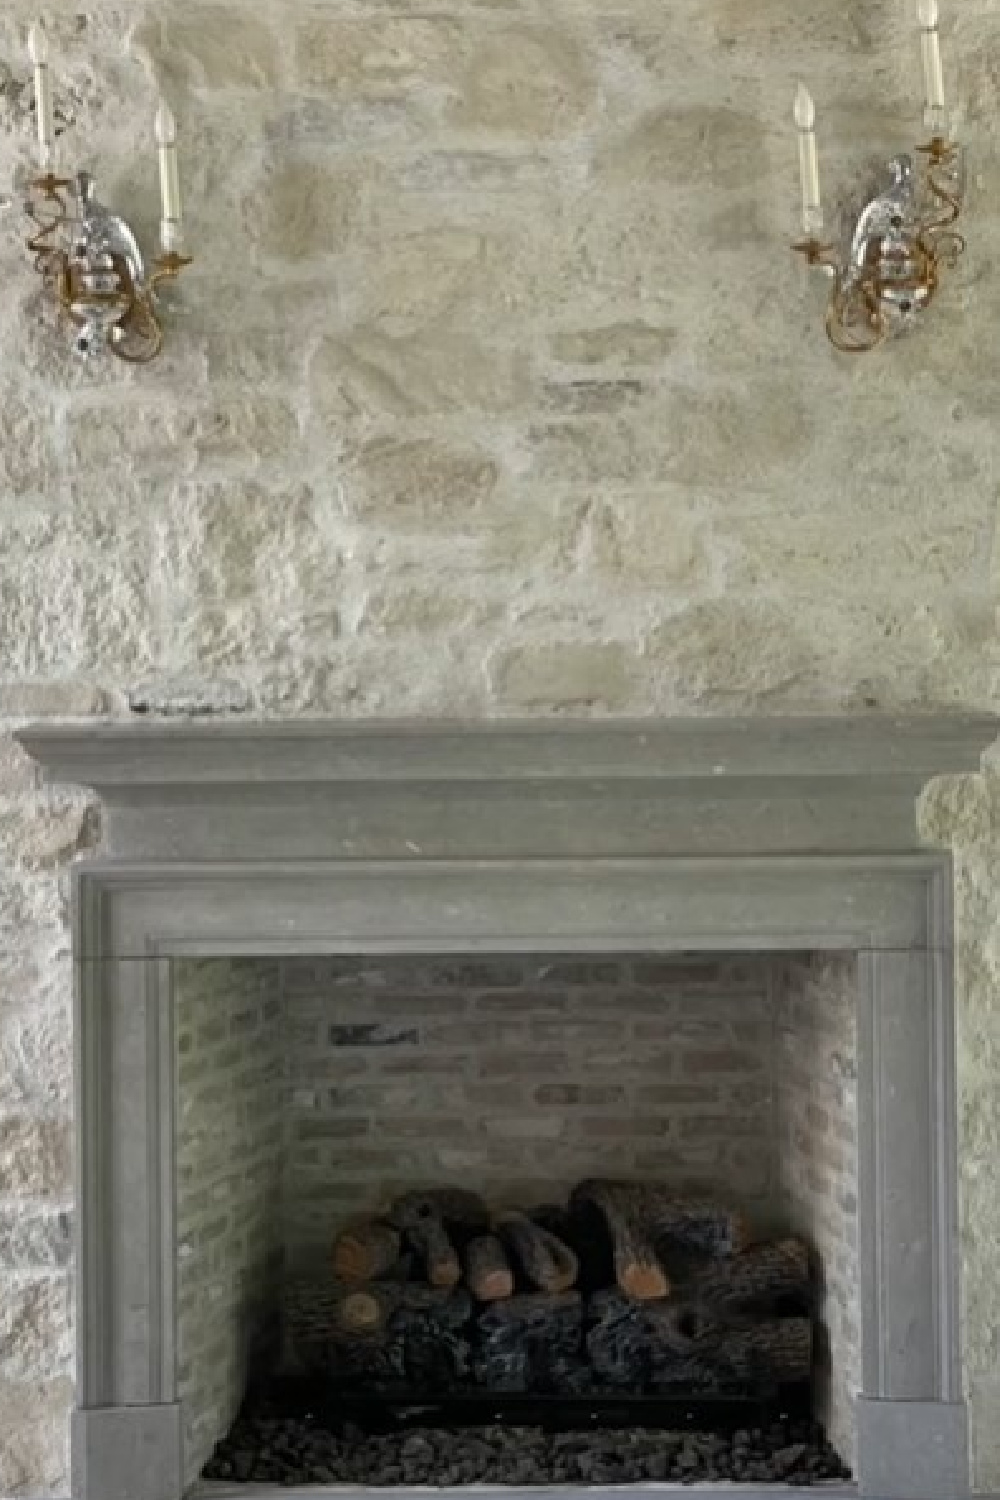 Old World style fireplace and stone surround with elegant sconces - Brooke Giannetti of Velvet and Linen.